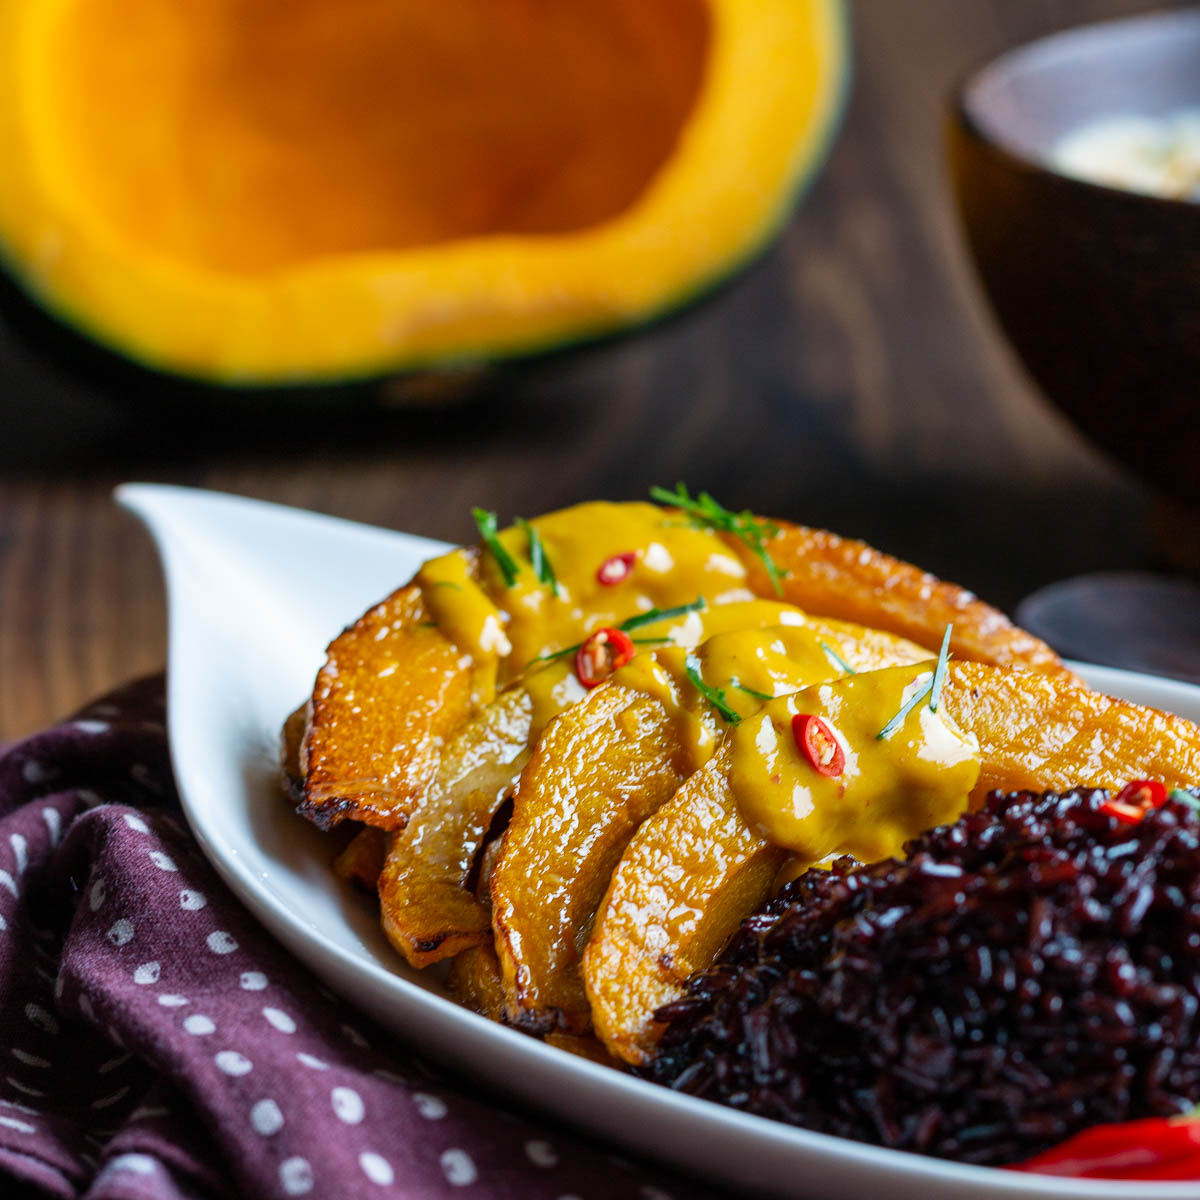 Roasted air fryer kabocha squash with Thai curried sauce on top in a white plate served with black rice.